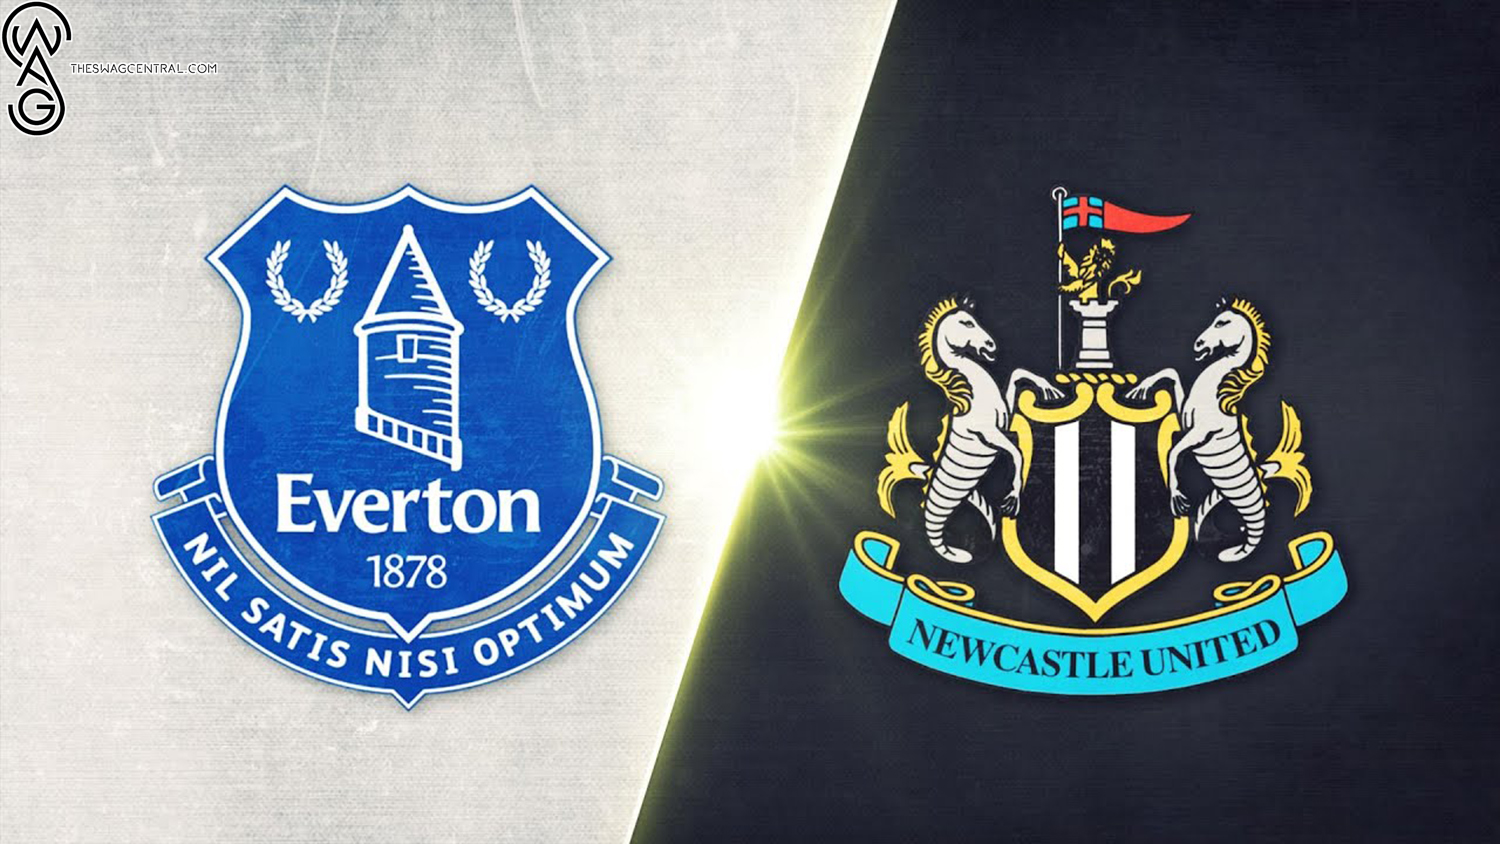 Tyneside Tension Newcastle United Clash with Everton in Crucial Premier League Match